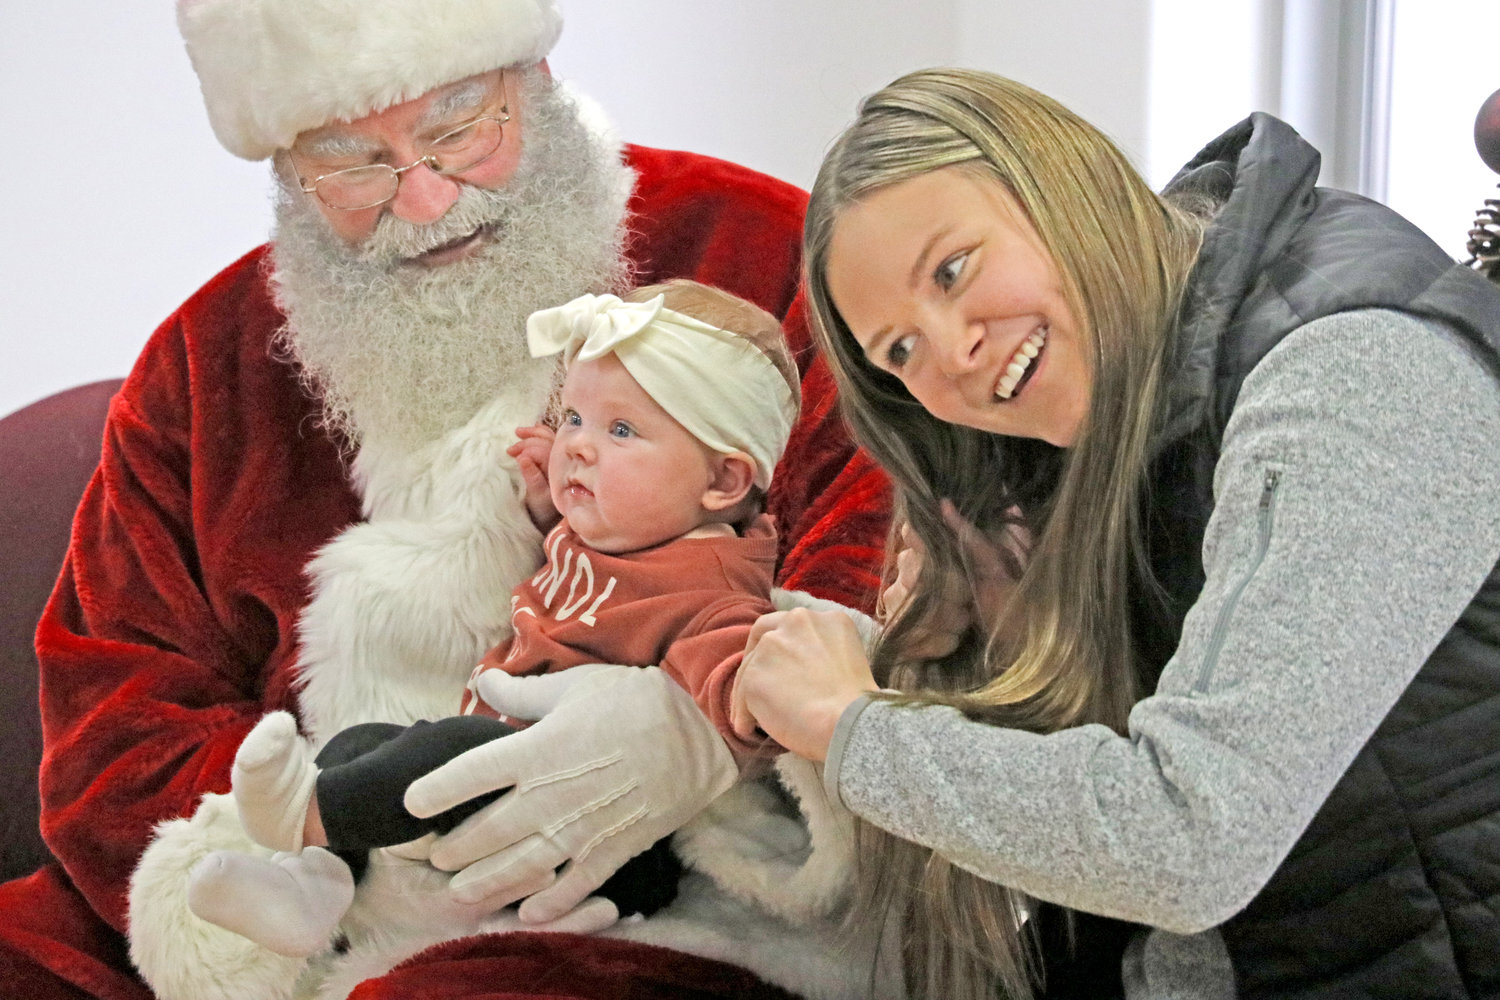 A hug from Santa makes for a memorable first Christmas.